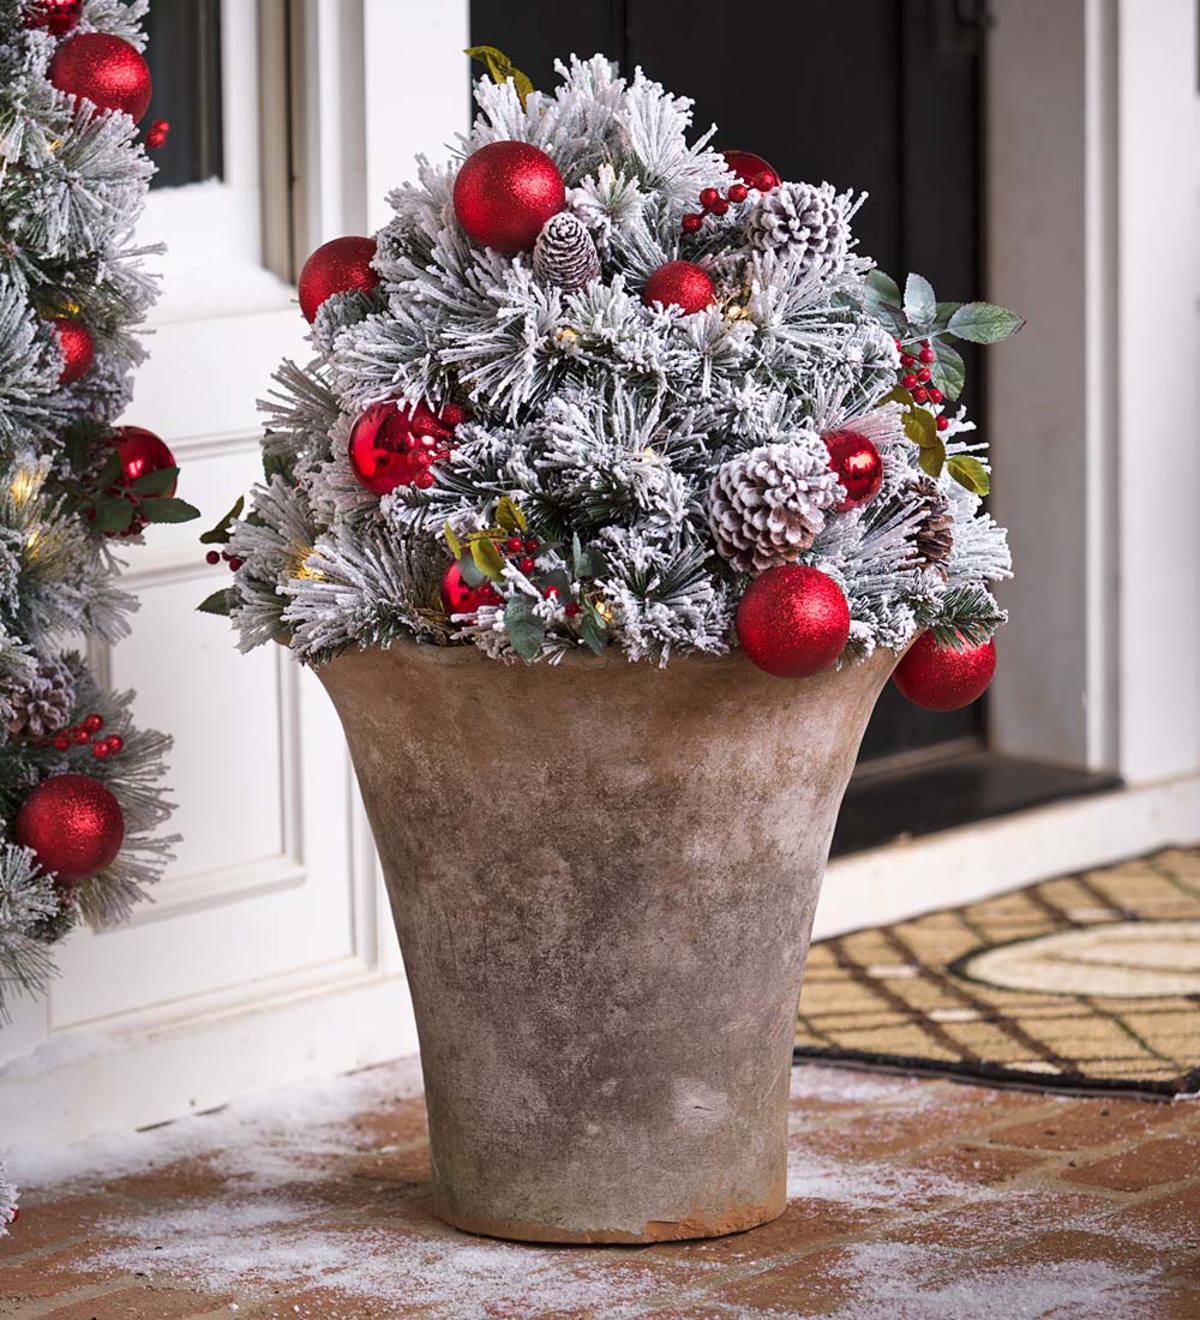 Fairfax Lighted Decorated Holiday Urn Filler